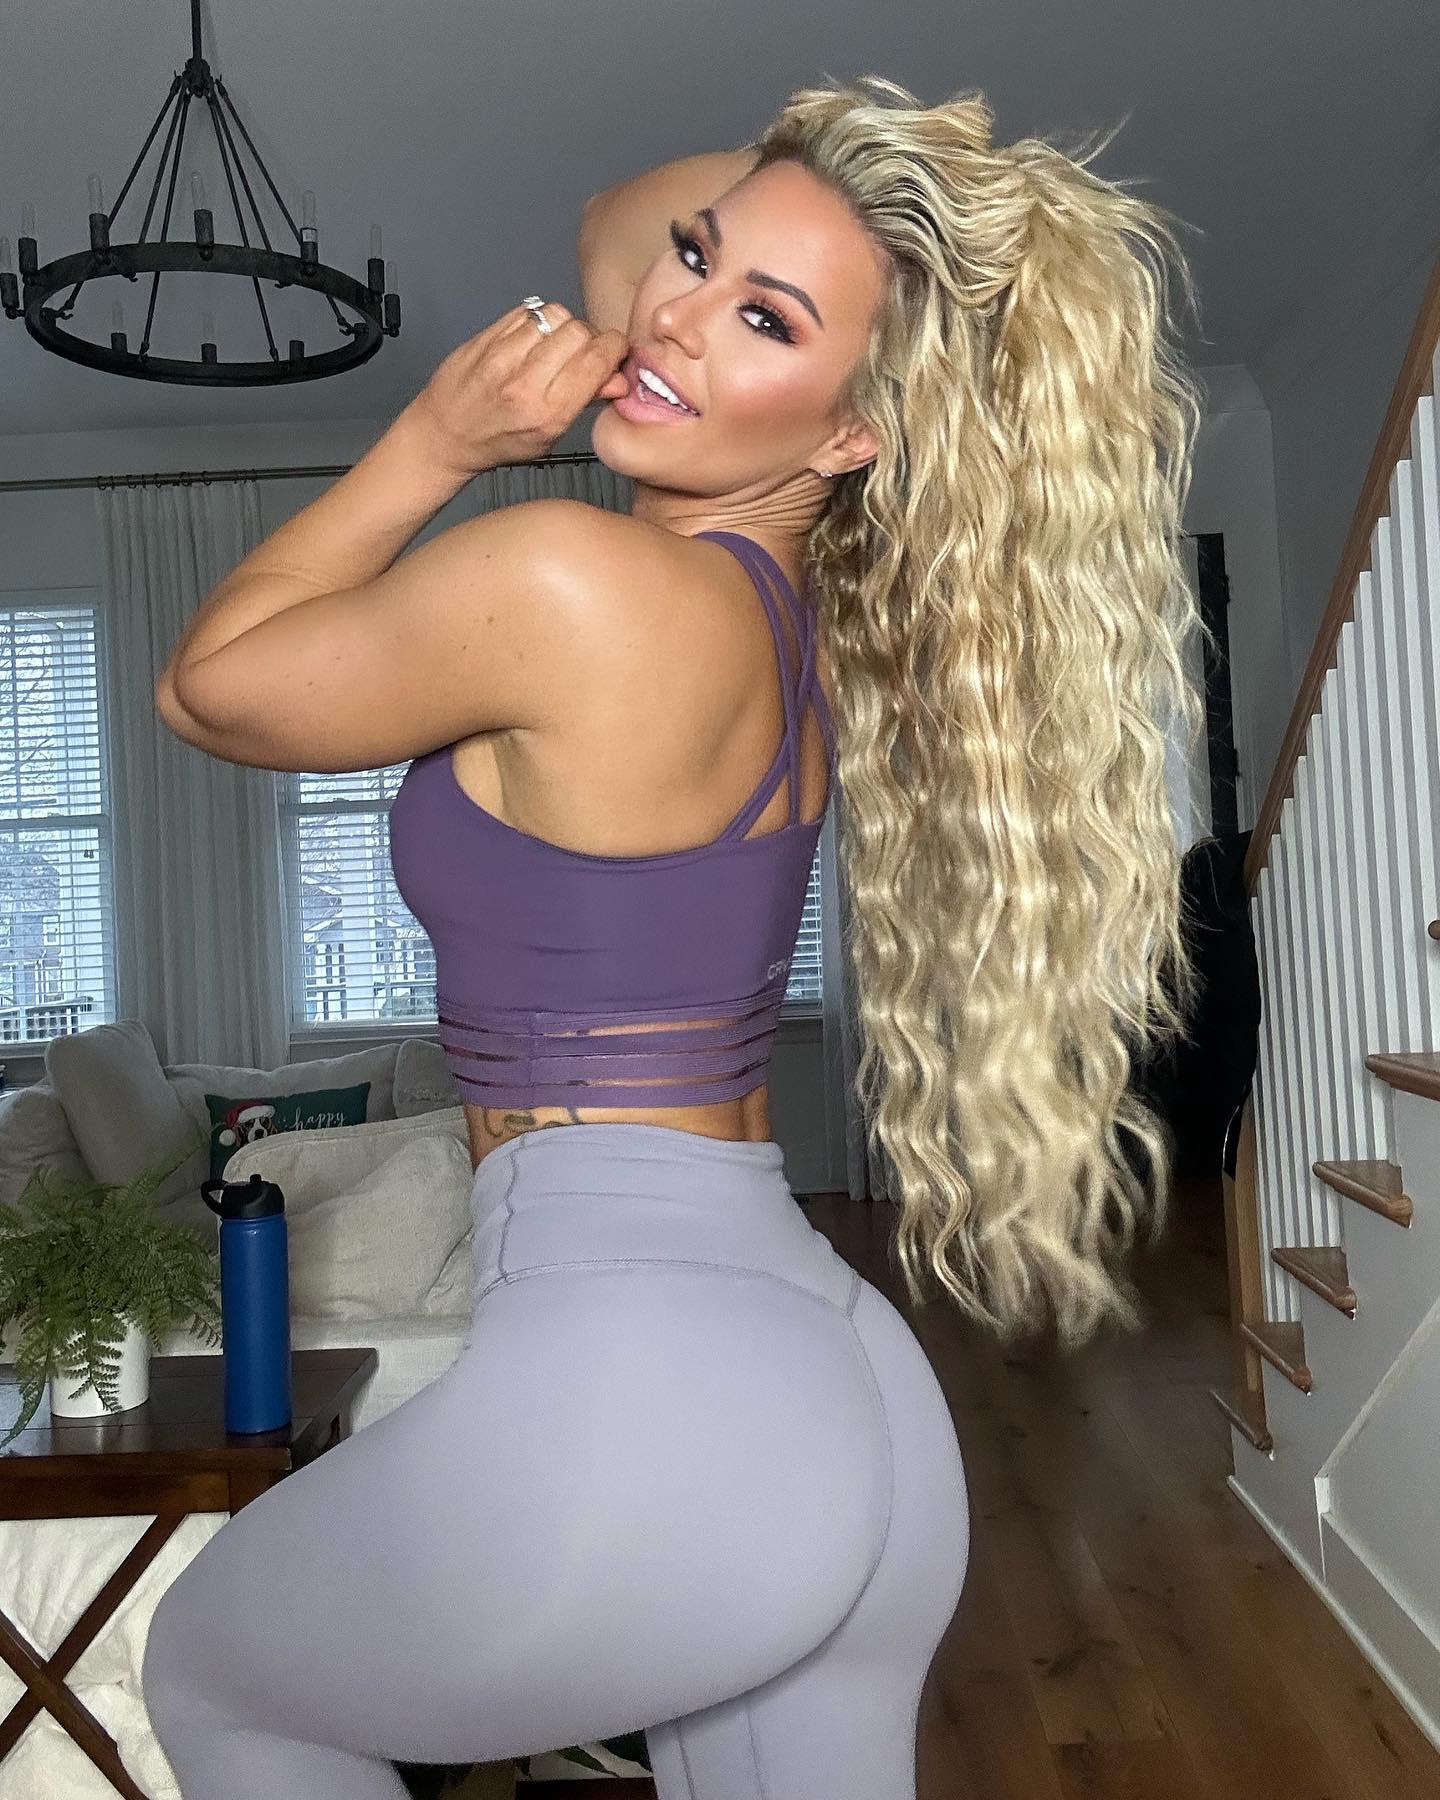 Kindly Myers In Tight Leggings Asks 'Do You Like My Outfit?